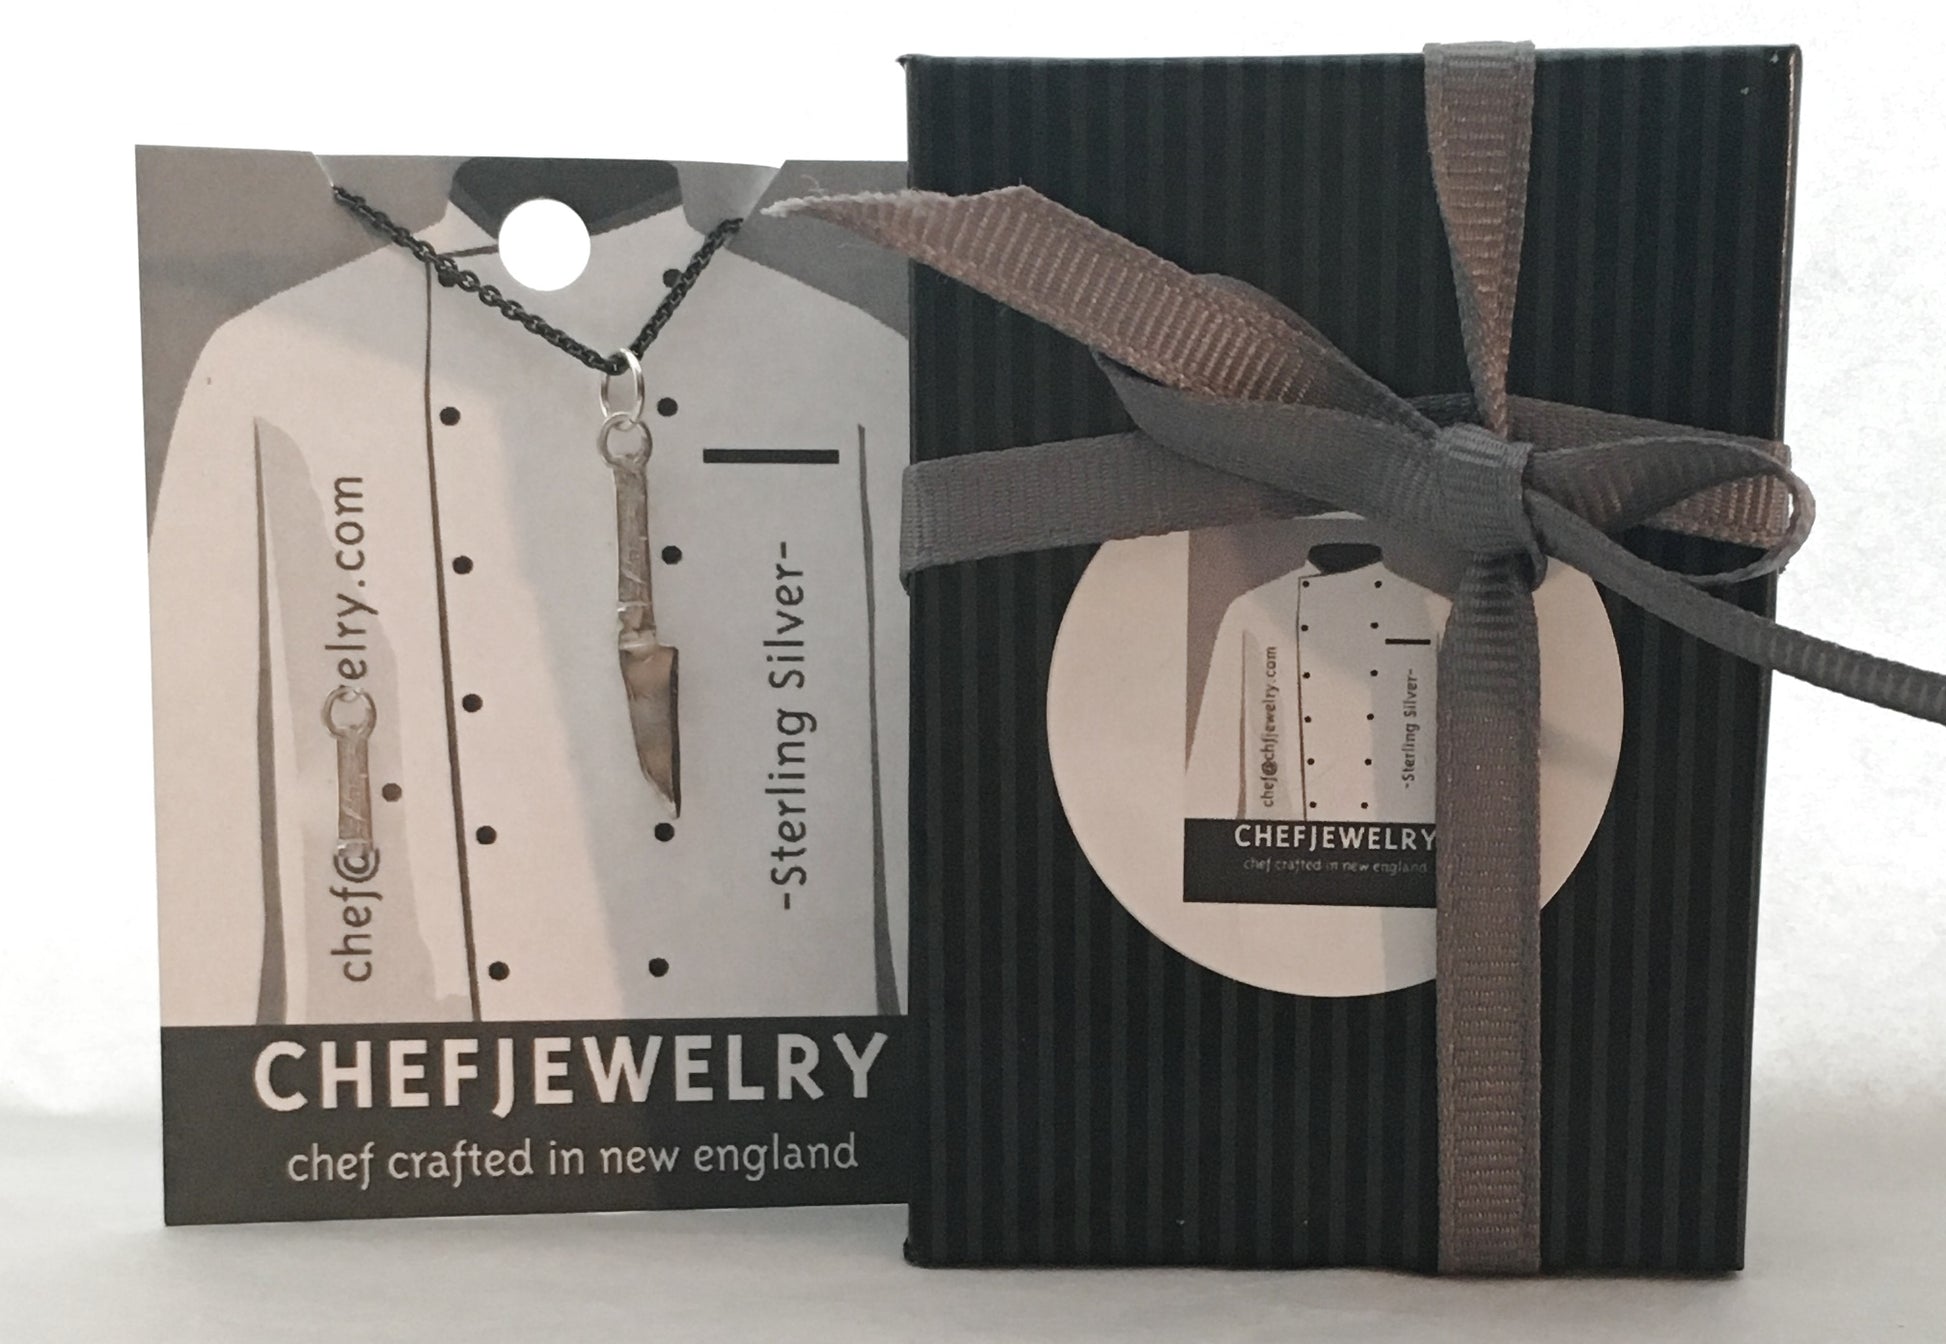 Your charm will arrive in this custom ChefJewelry packaging